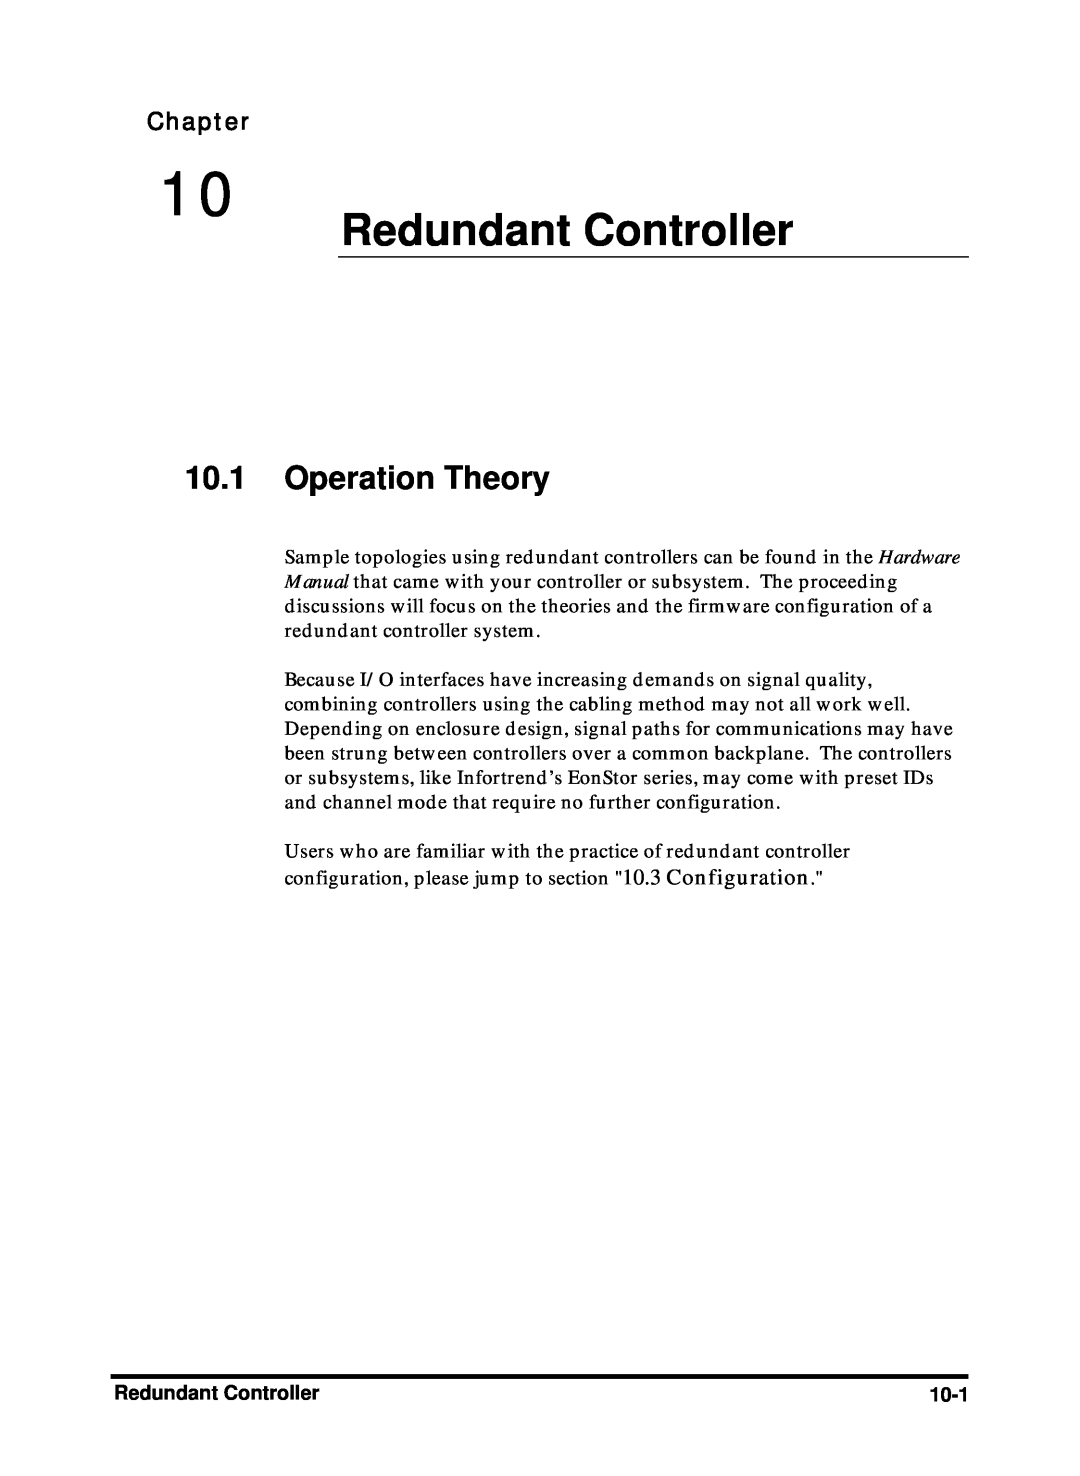 Compaq Infortrend manual Redundant Controller, Operation Theory, Chapter 